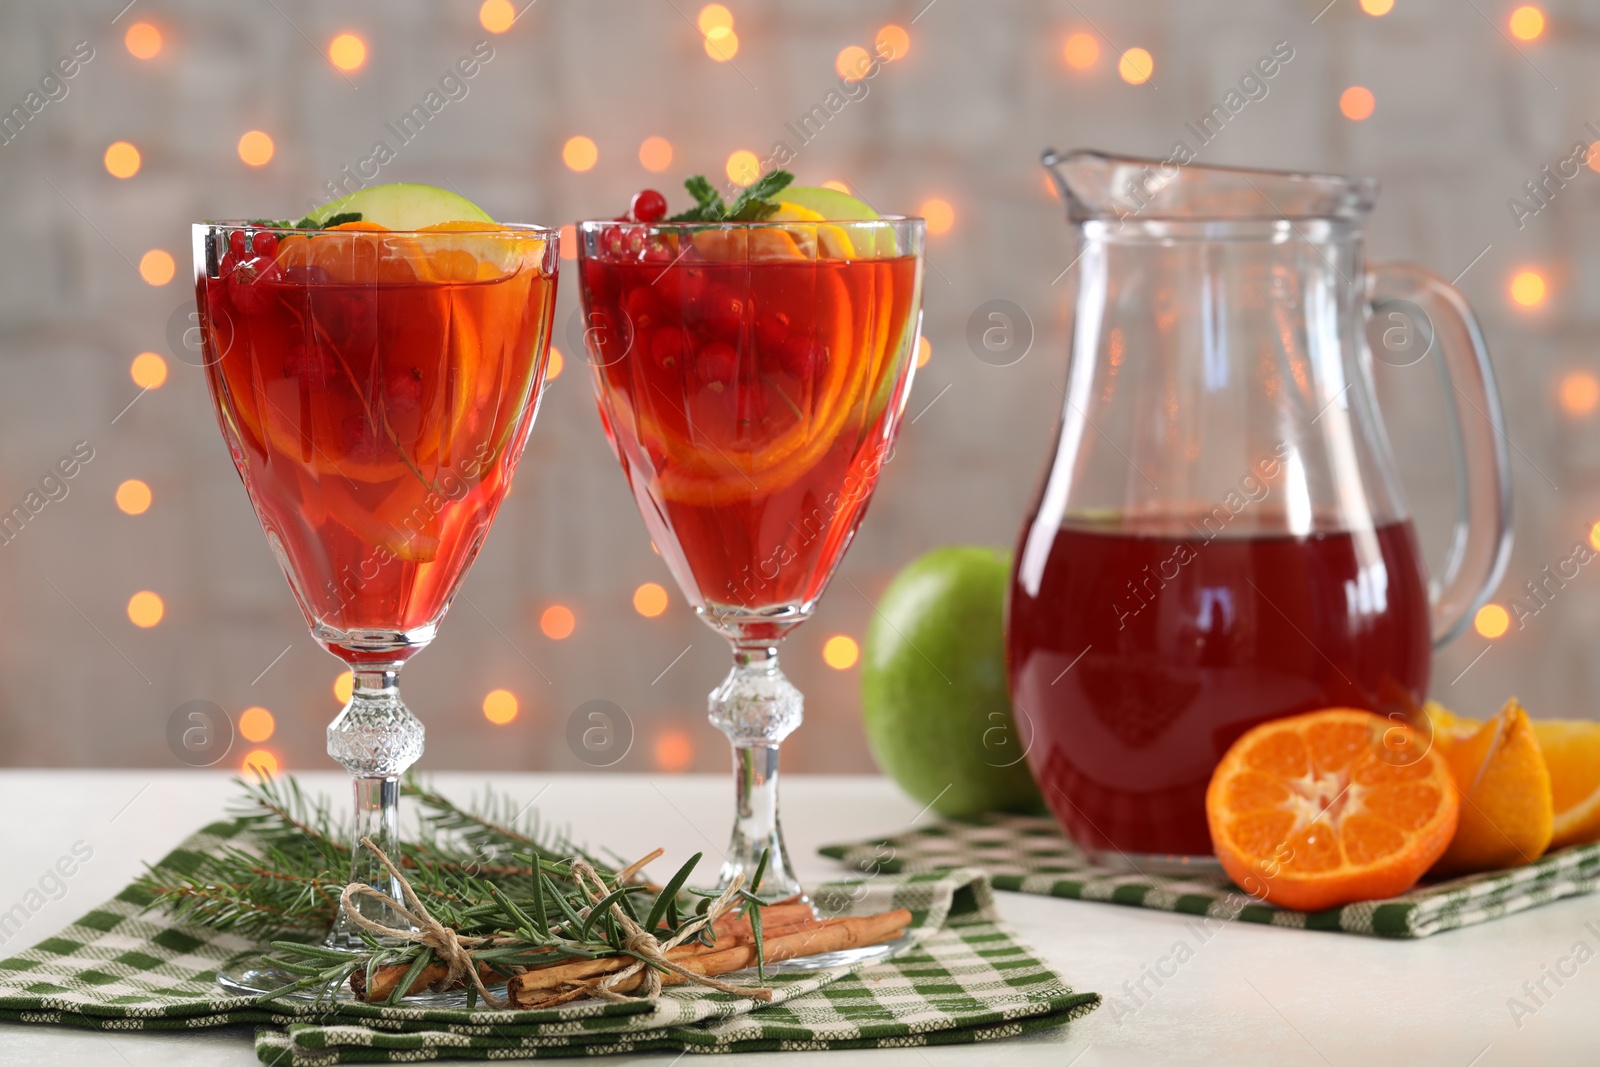 Photo of Christmas Sangria cocktail in glasses and jug, ingredients and fir tree branch on white table against blurred lights